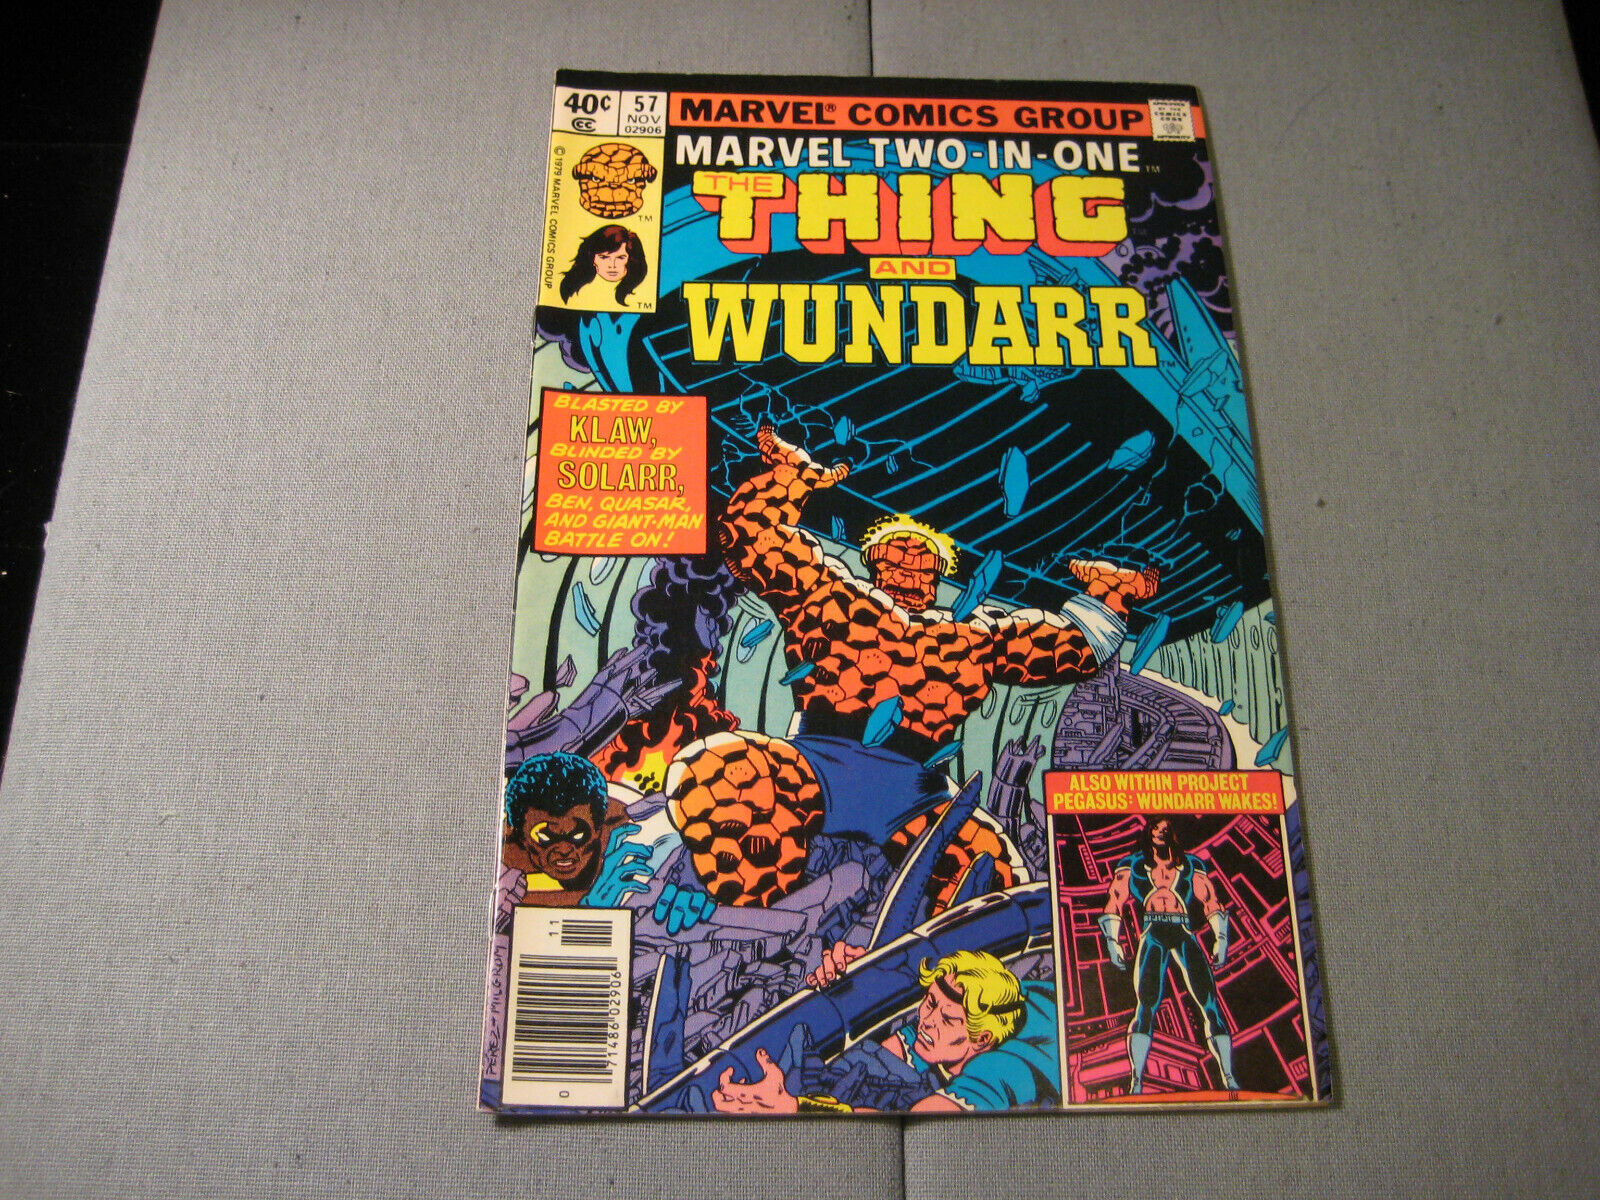 Marvel Two-in-One #57 (Marvel Comics, 1979) Thing Wundarr